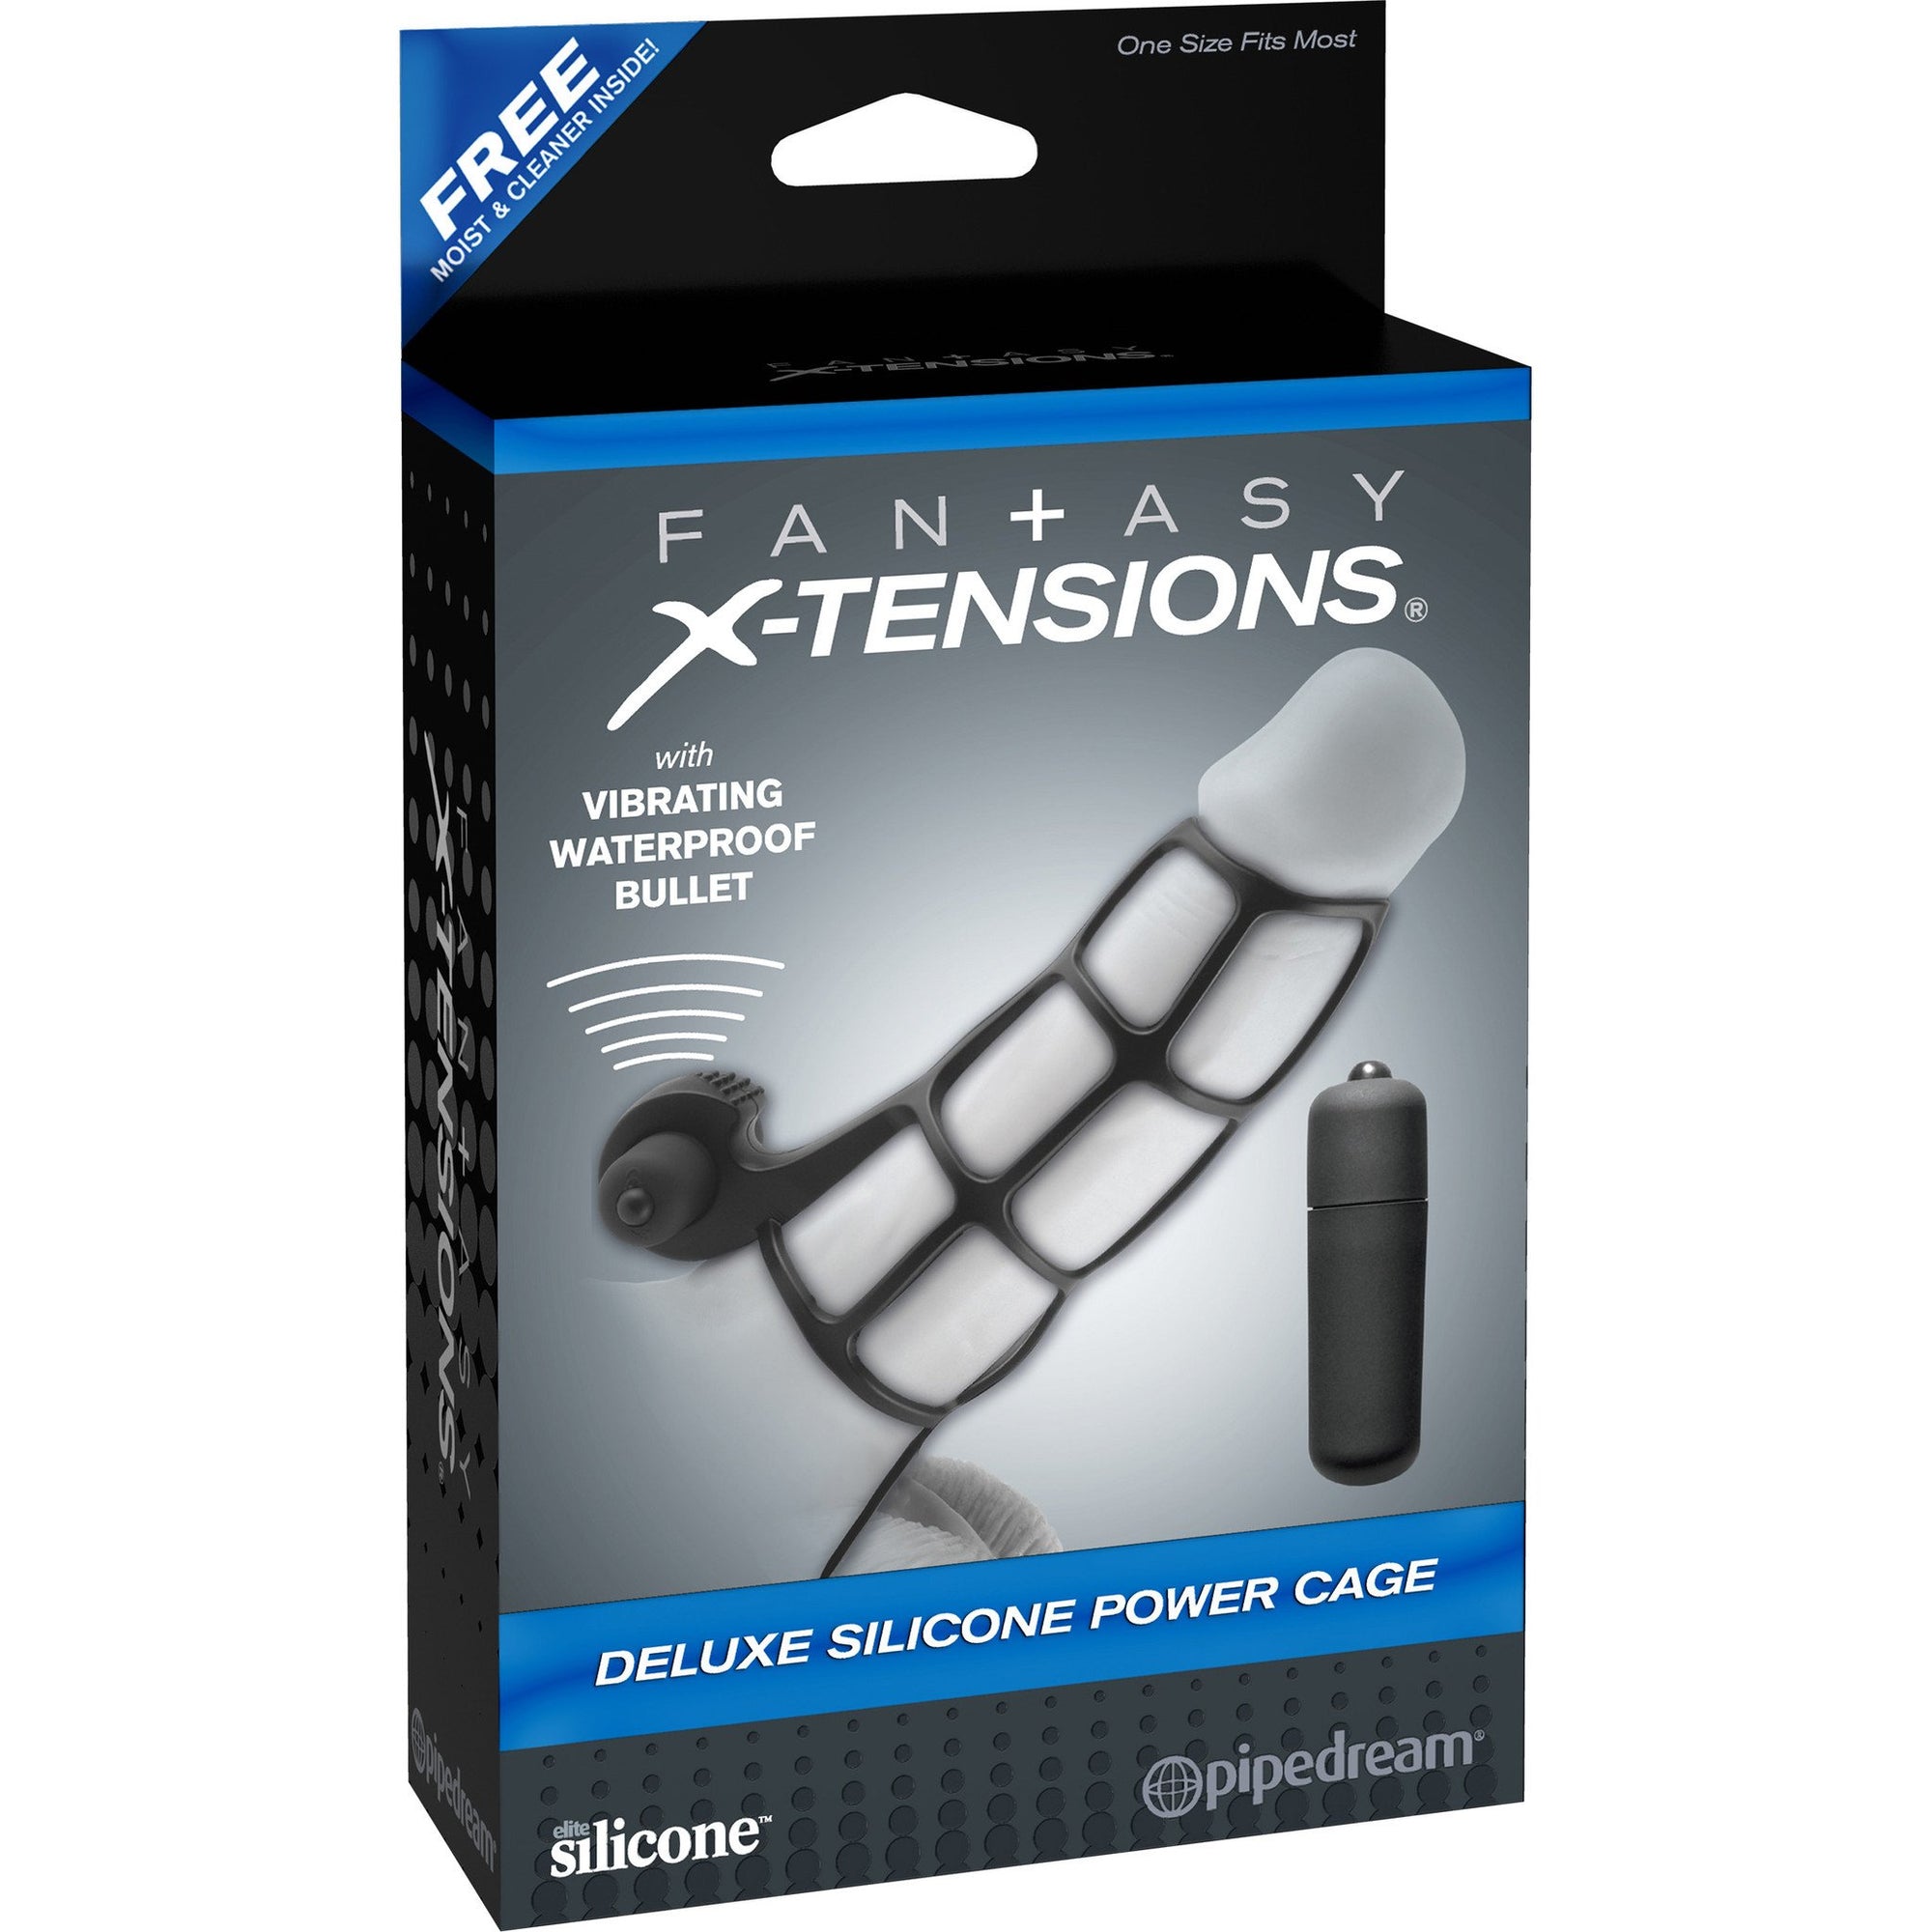 Pipedream - Fantasy X-tensions Deluxe Silicone Power Cage - PleasureHobby